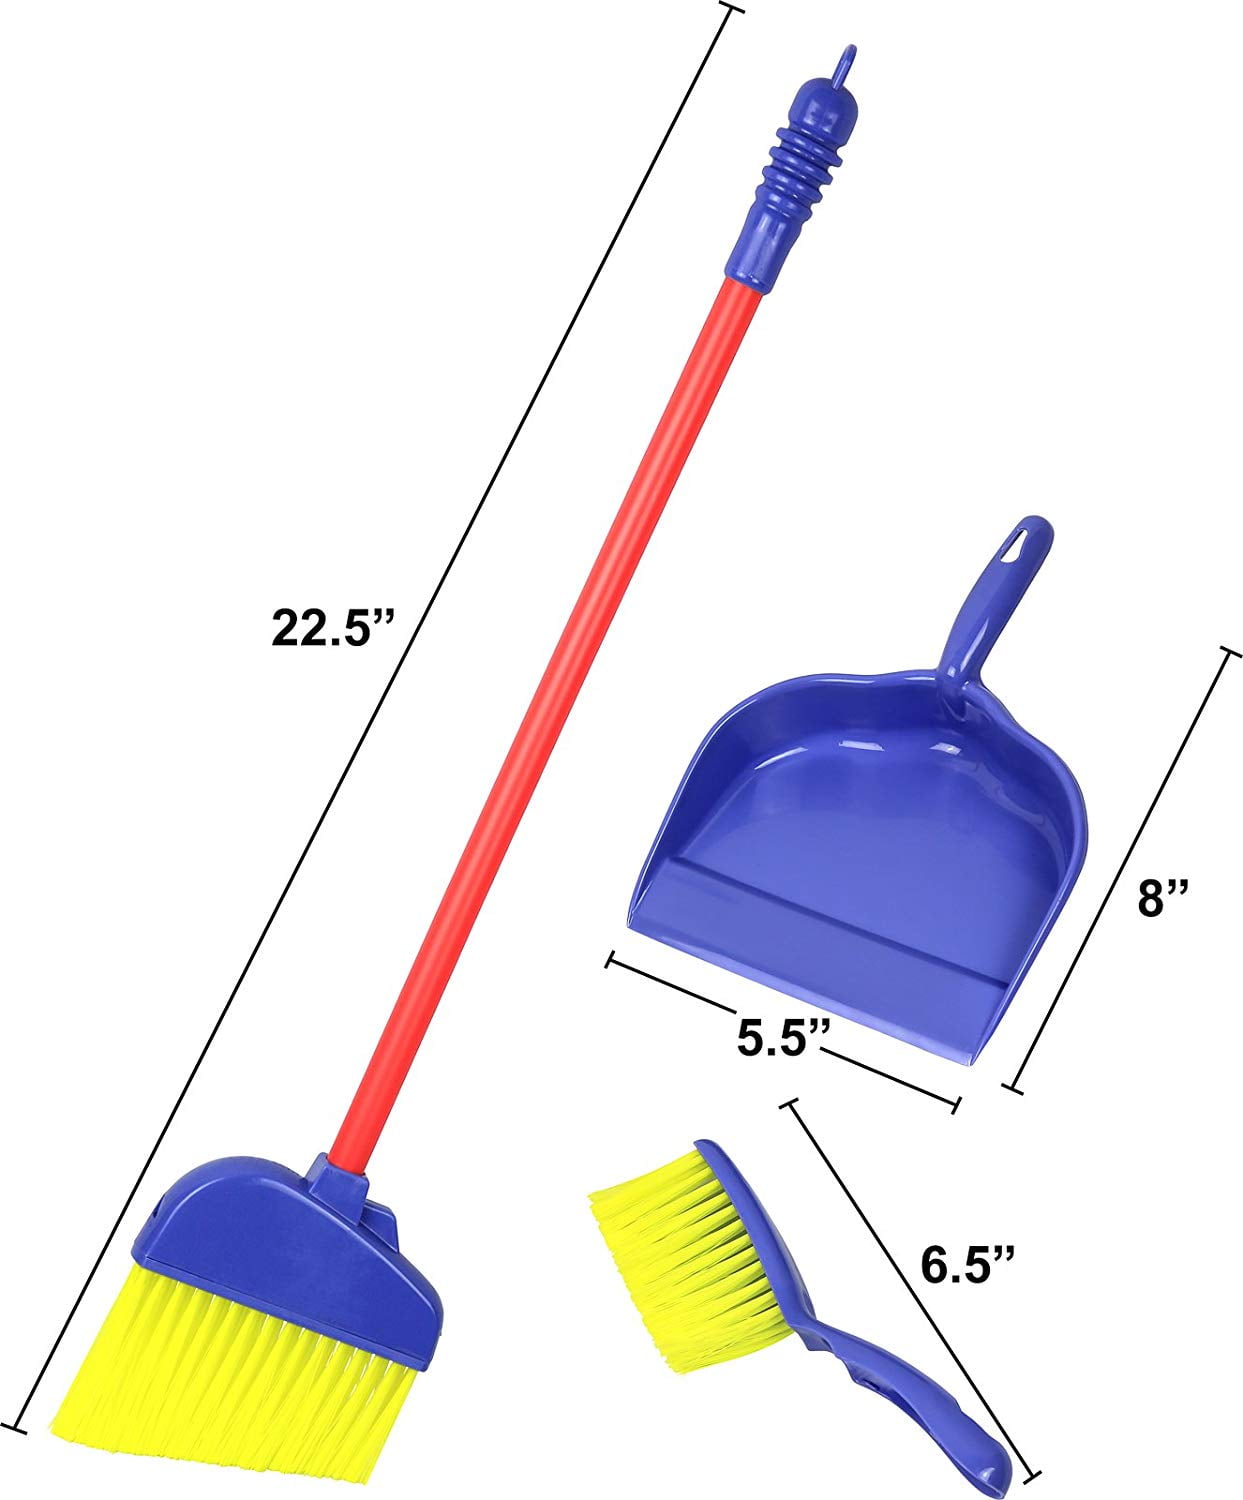 Kids Cleaning Set Pretend Play Broom Mop Brush Dustpan 4 Pc Gift Learn Toy New 